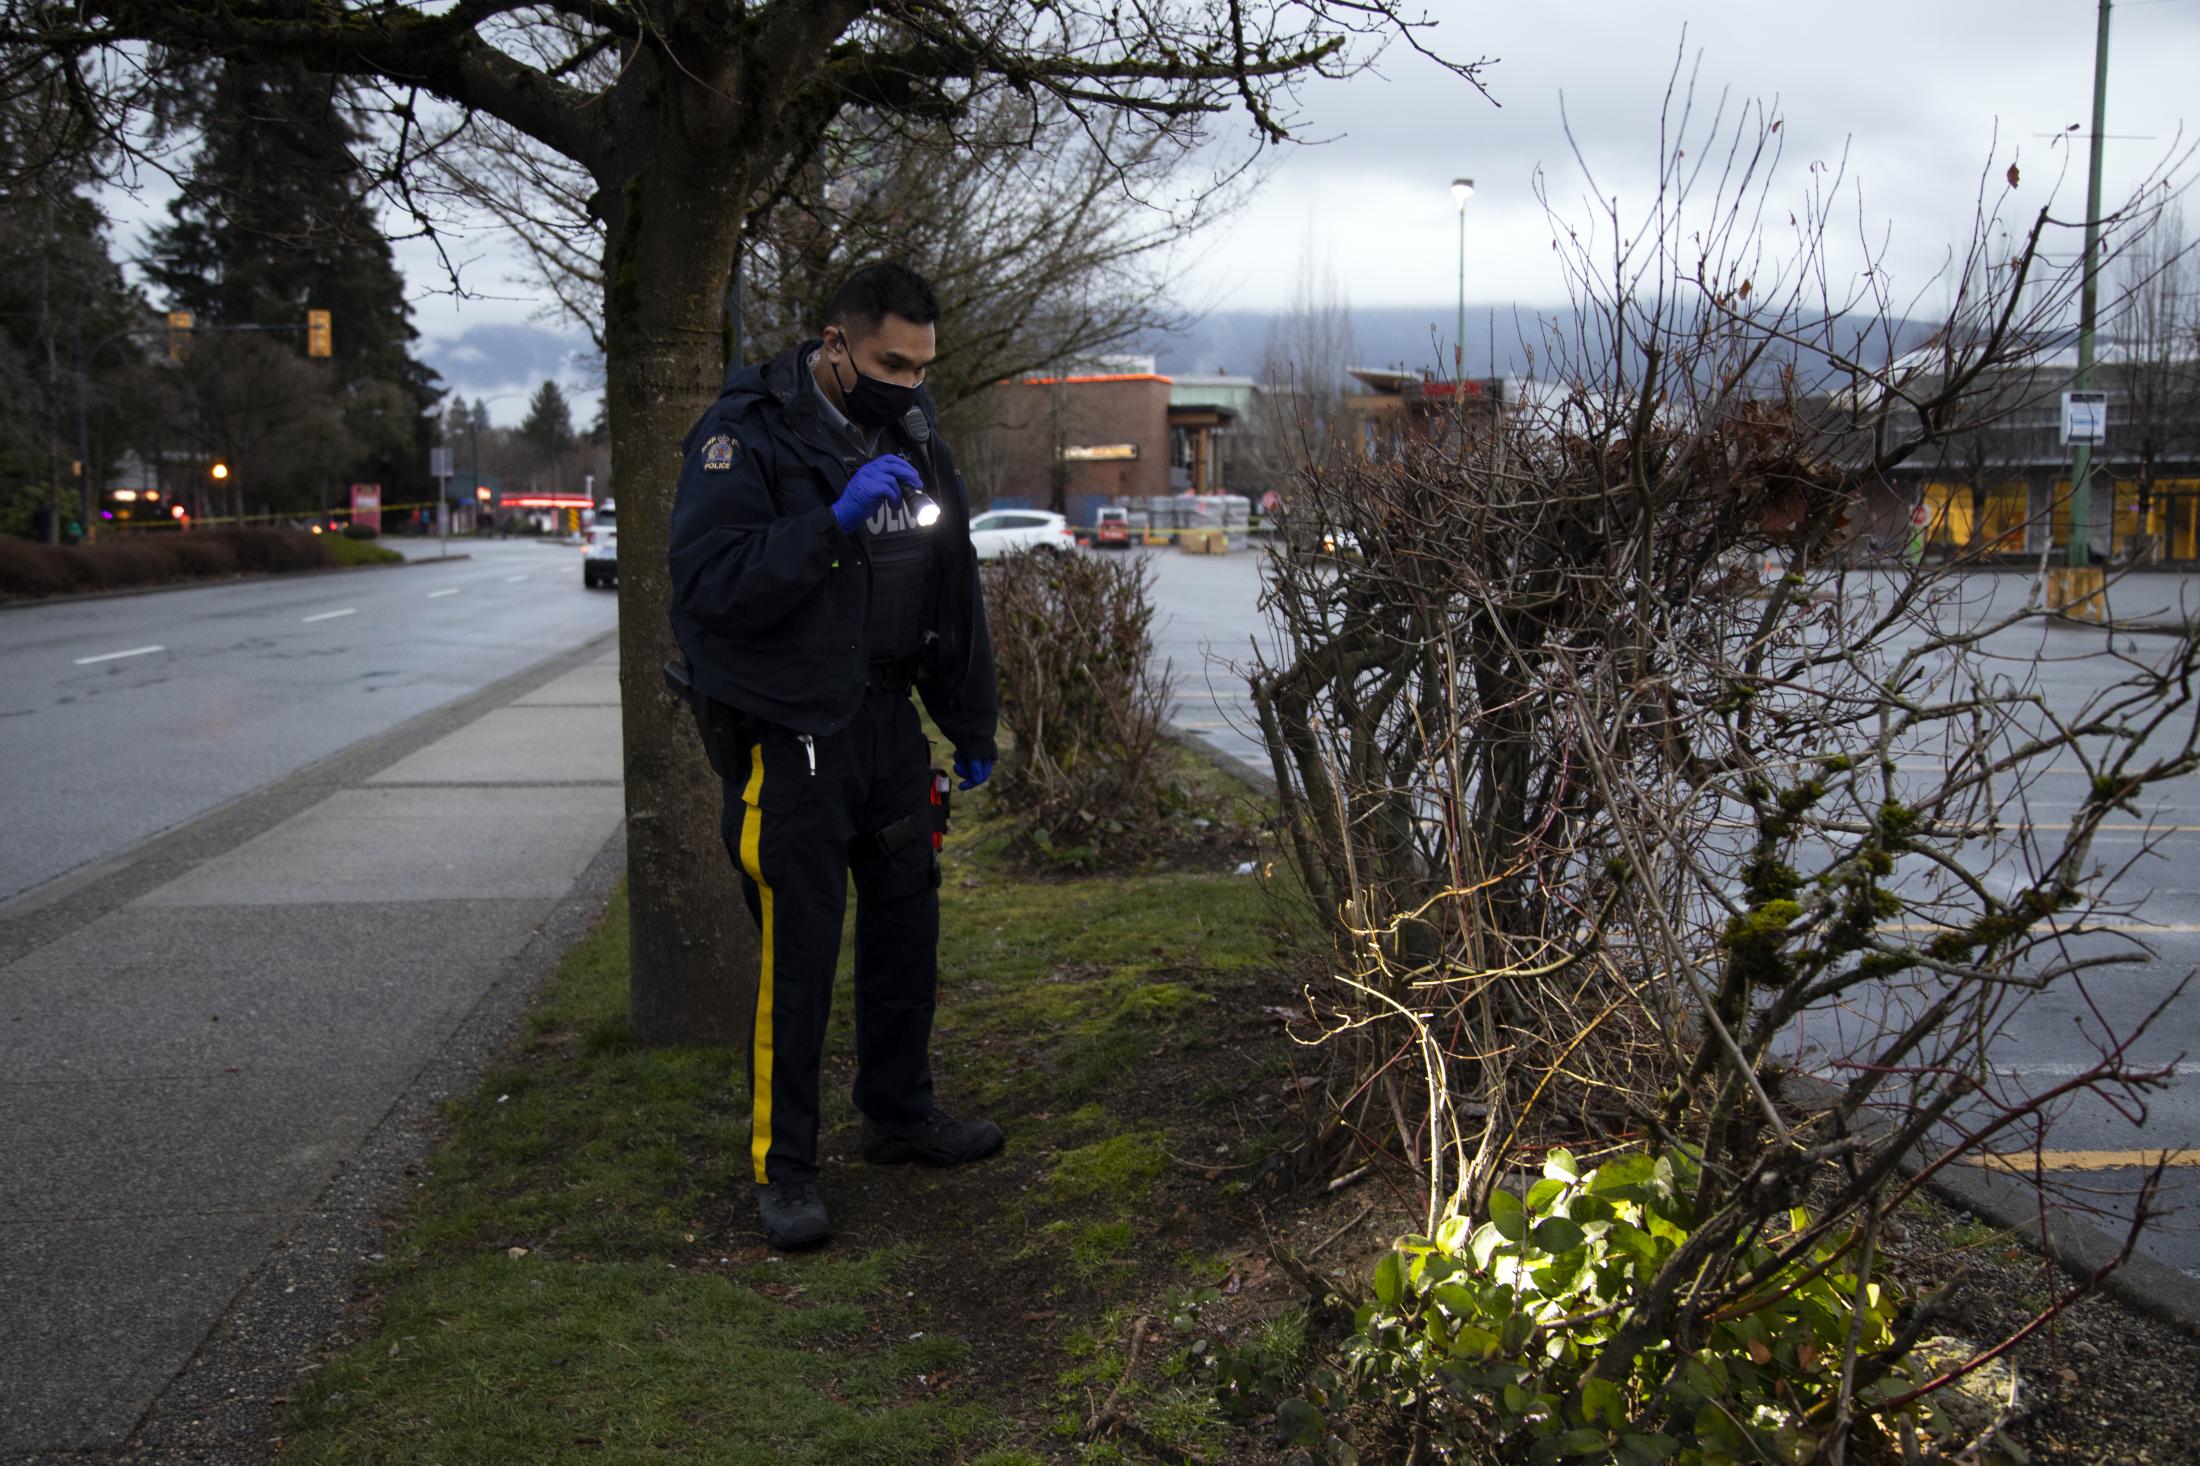 Lynn Valley Stabbings - A woman was killed and six hospitalized after a suspect...